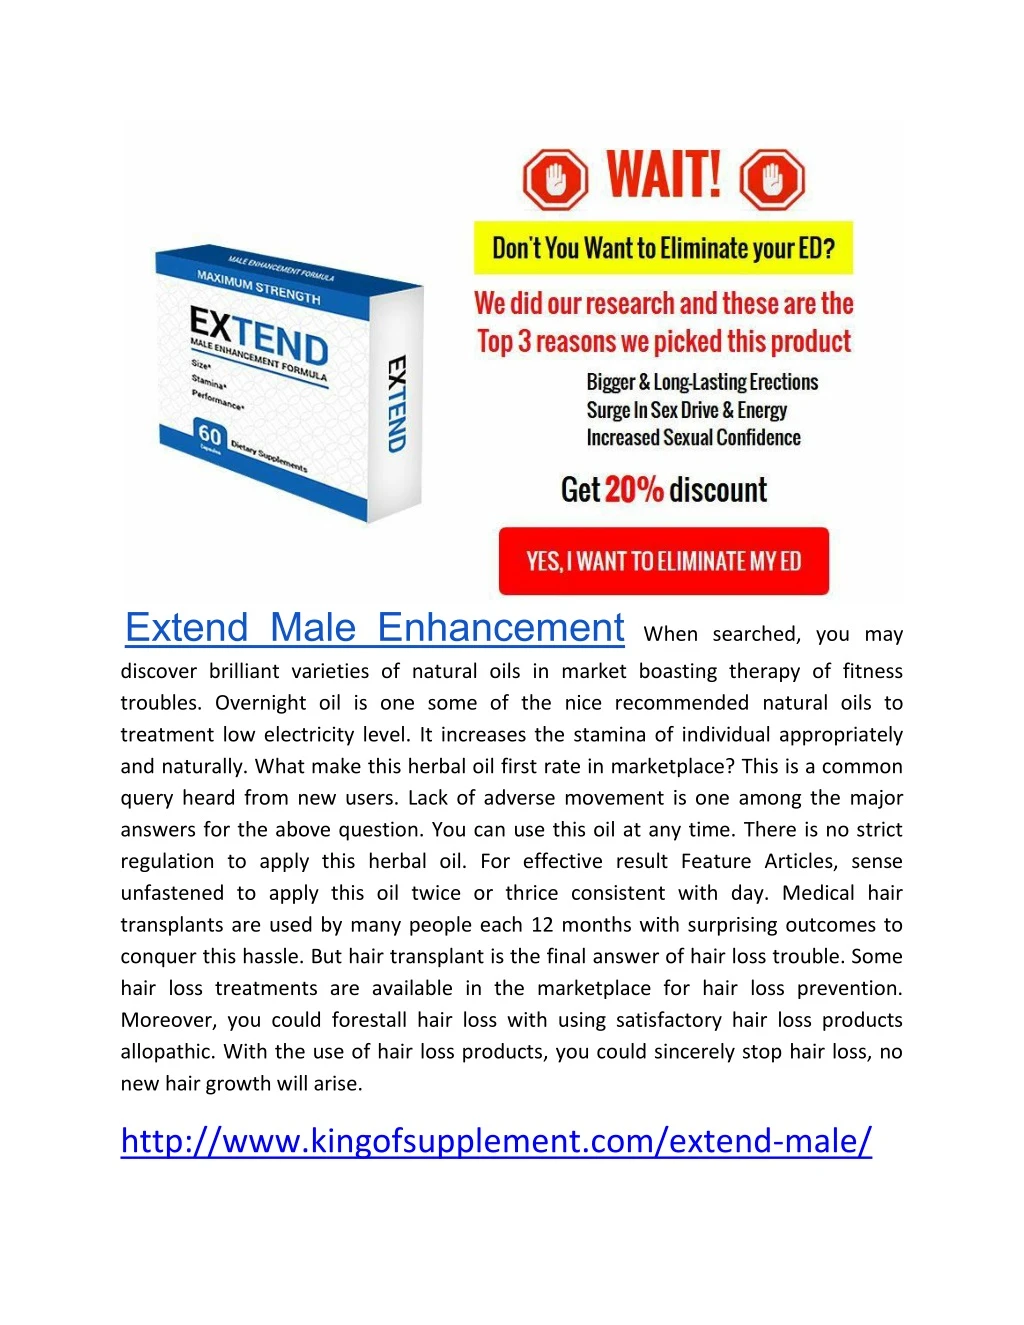 extend male enhancement when searched you may